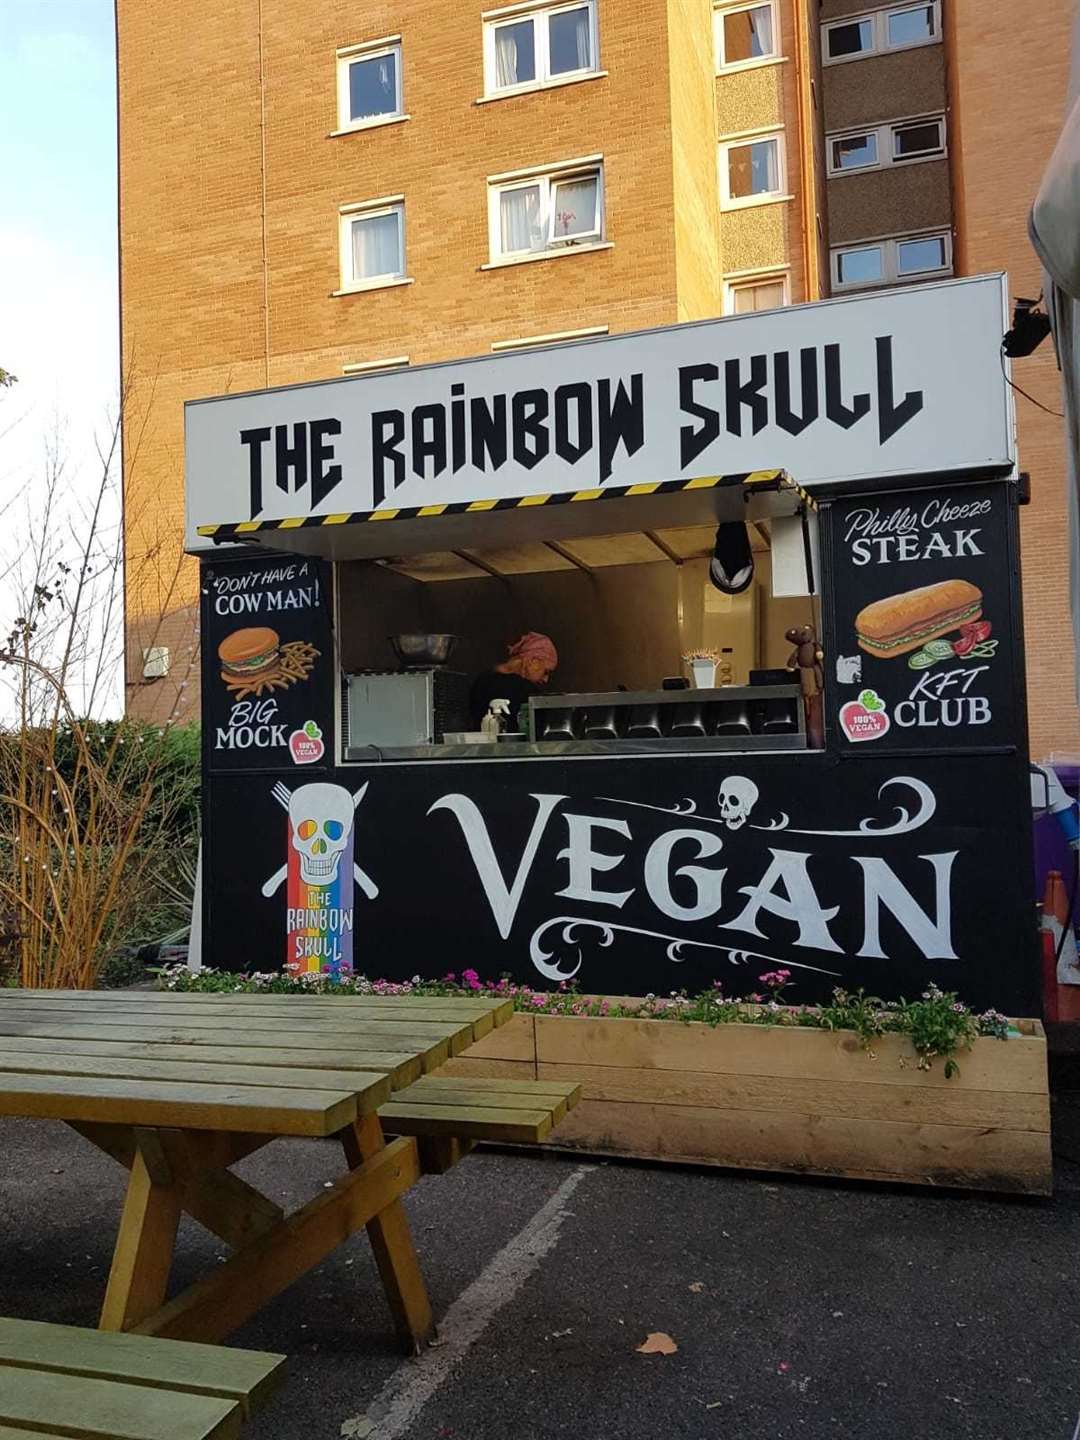 The Rainbow Skull vegan grill is moving to a new site in Maidstone town centre